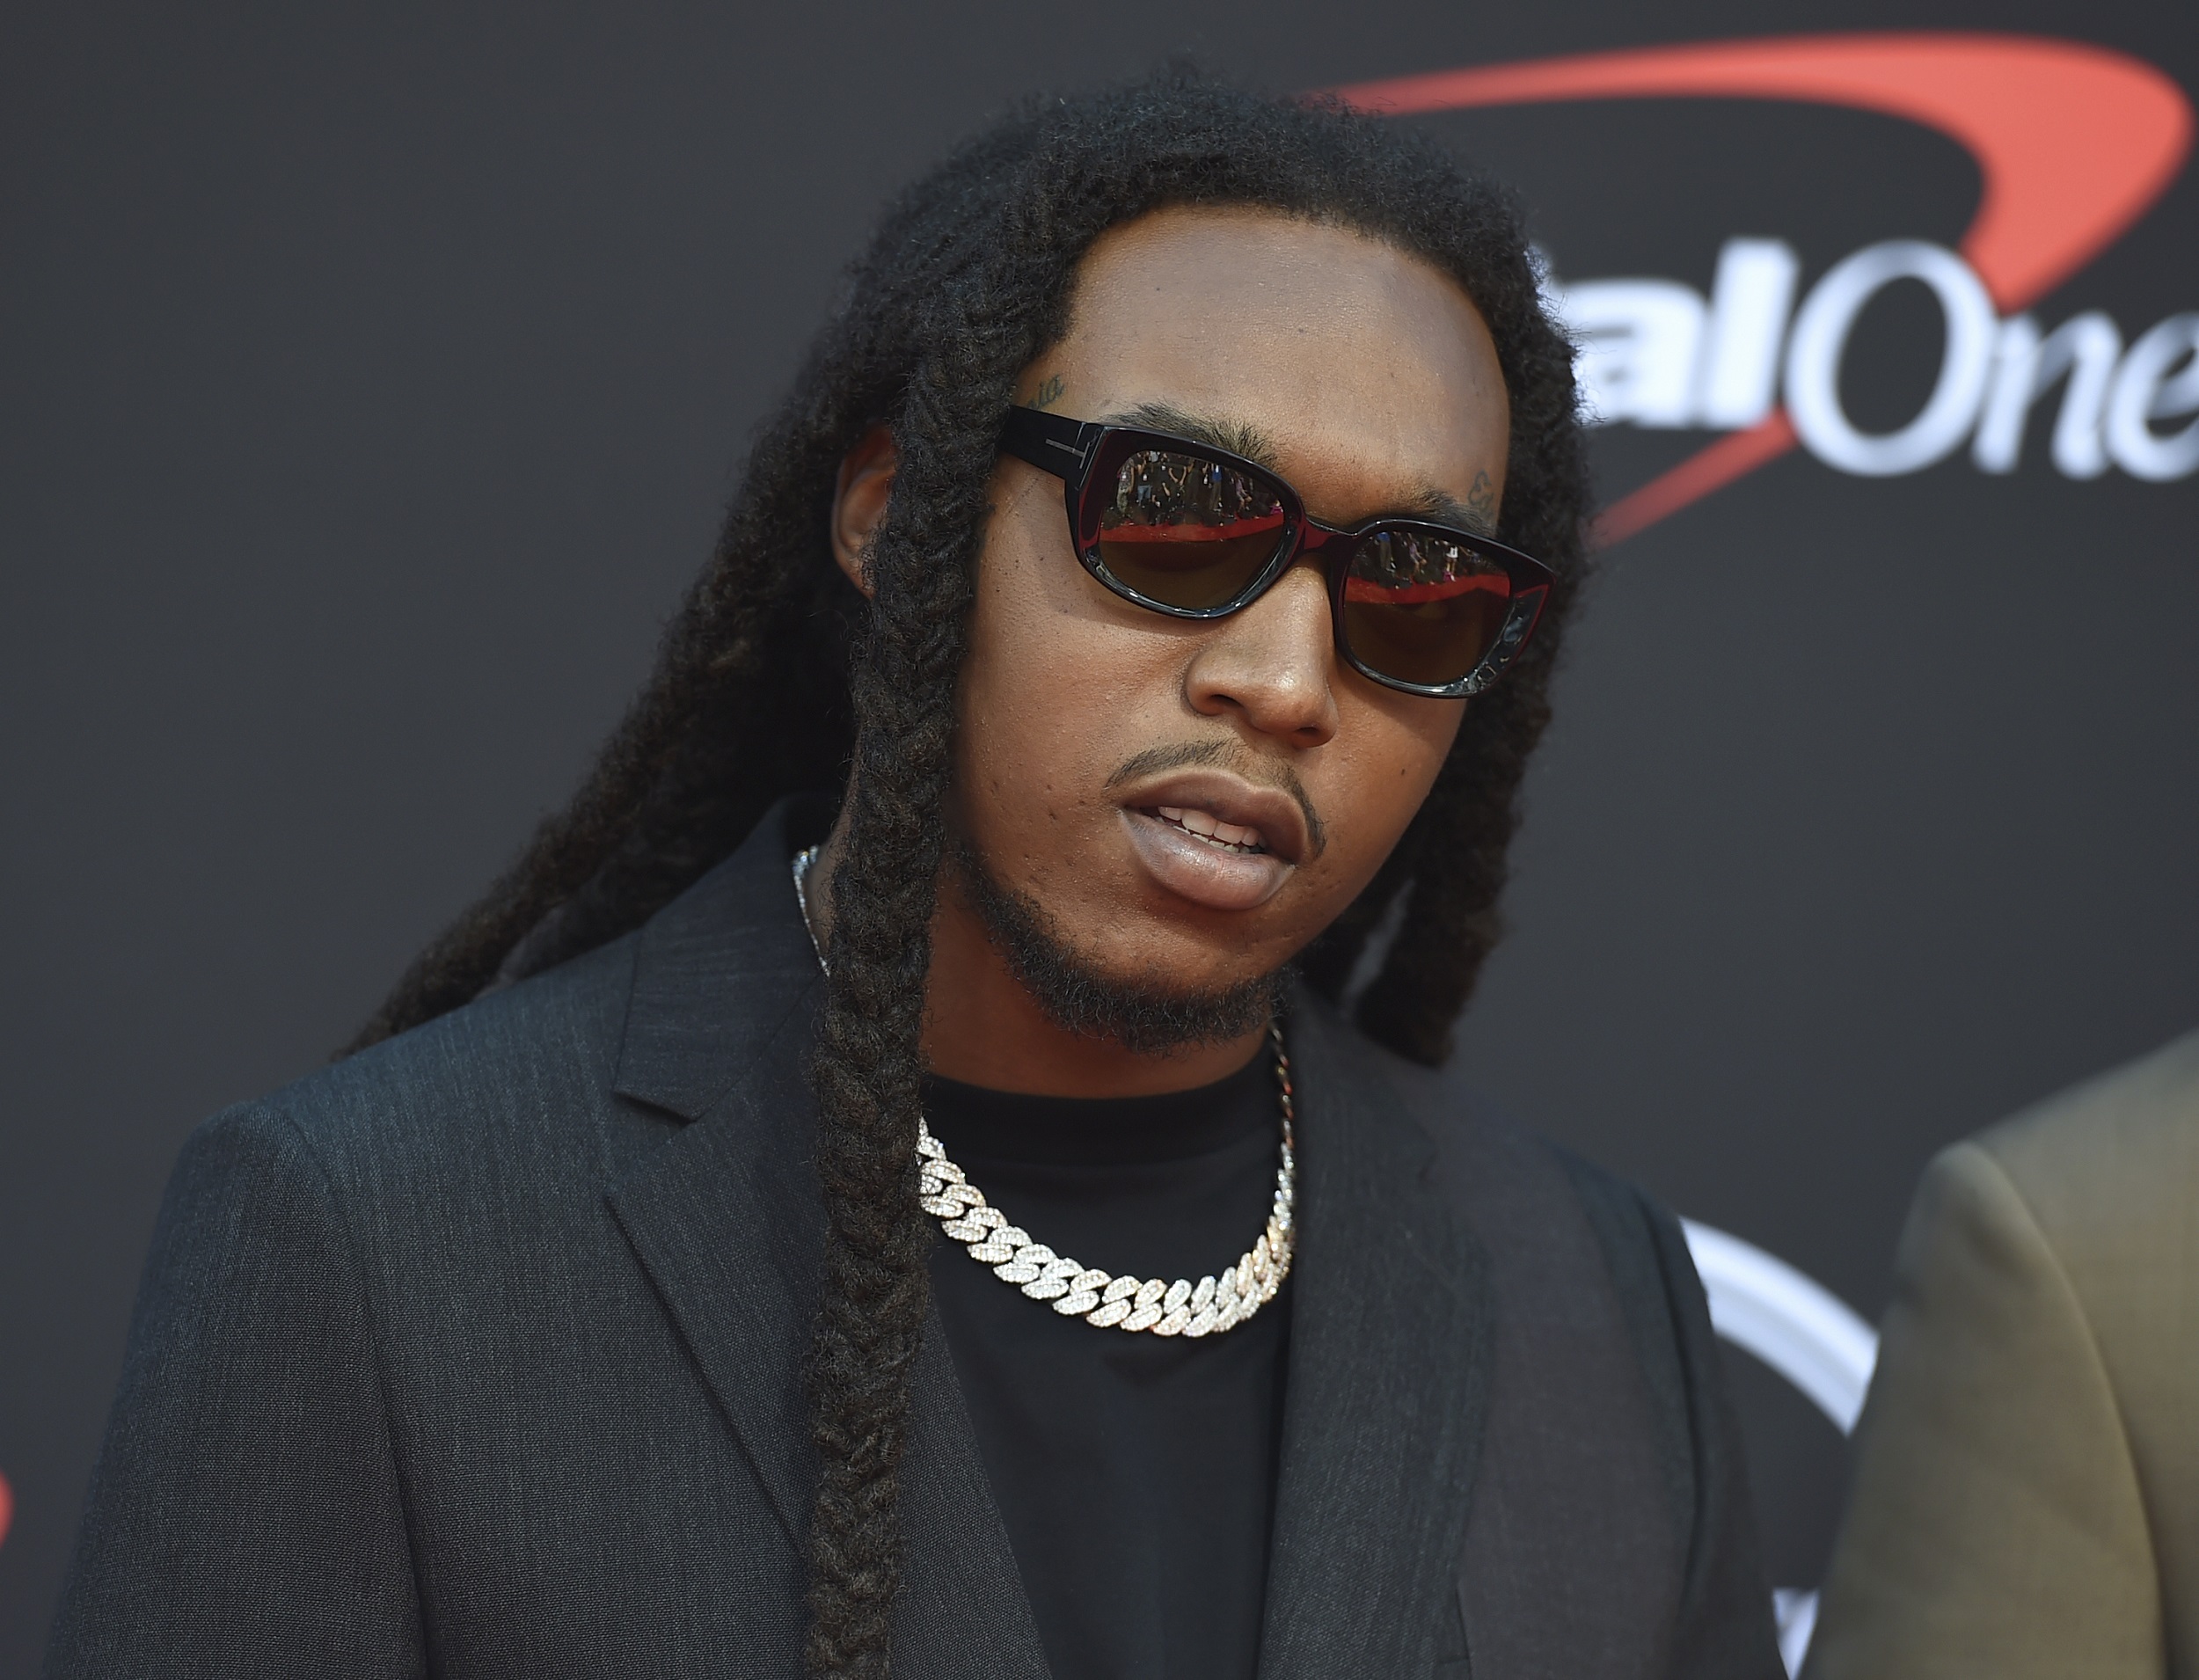 Man Arrested in Fatal Shooting of Migos Rapper Takeoff